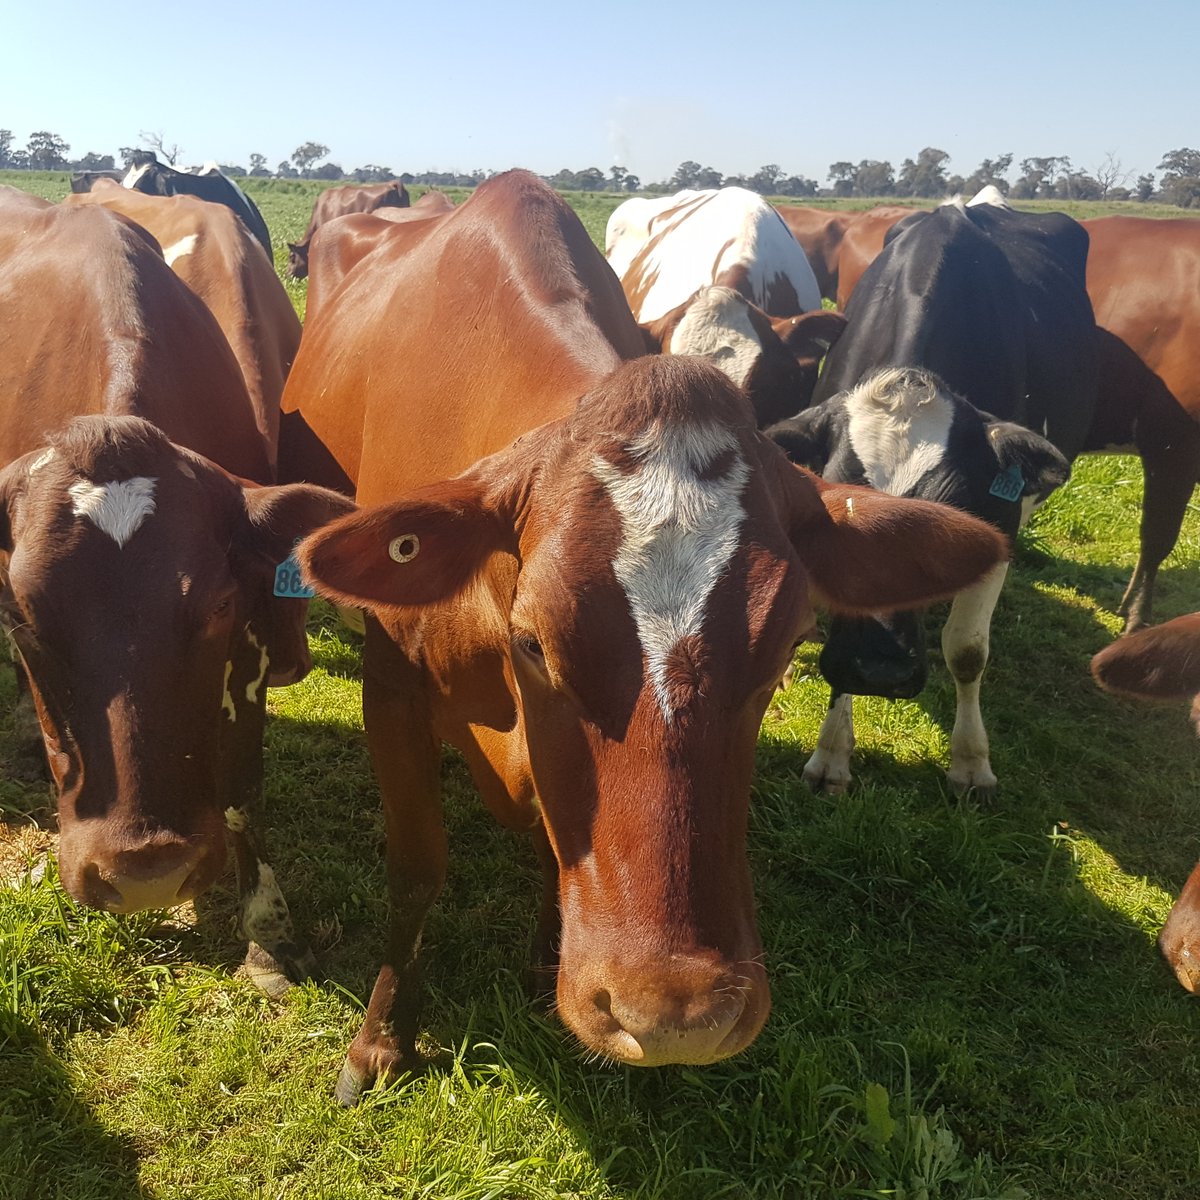 Happy National Ag Day from @Glencliffe Illawarras!👃 👩‍🌾🧑‍🌾Thank u 2 all our hard working farmers! 2 celebrate, some pics of our lovely cows, eating lunch and making milk! #WeAreAusFarmers #AgDayAU @AustWomenInAg @NationalFarmers @VFF_UDV @NRWNetwork @AgPeriUrban